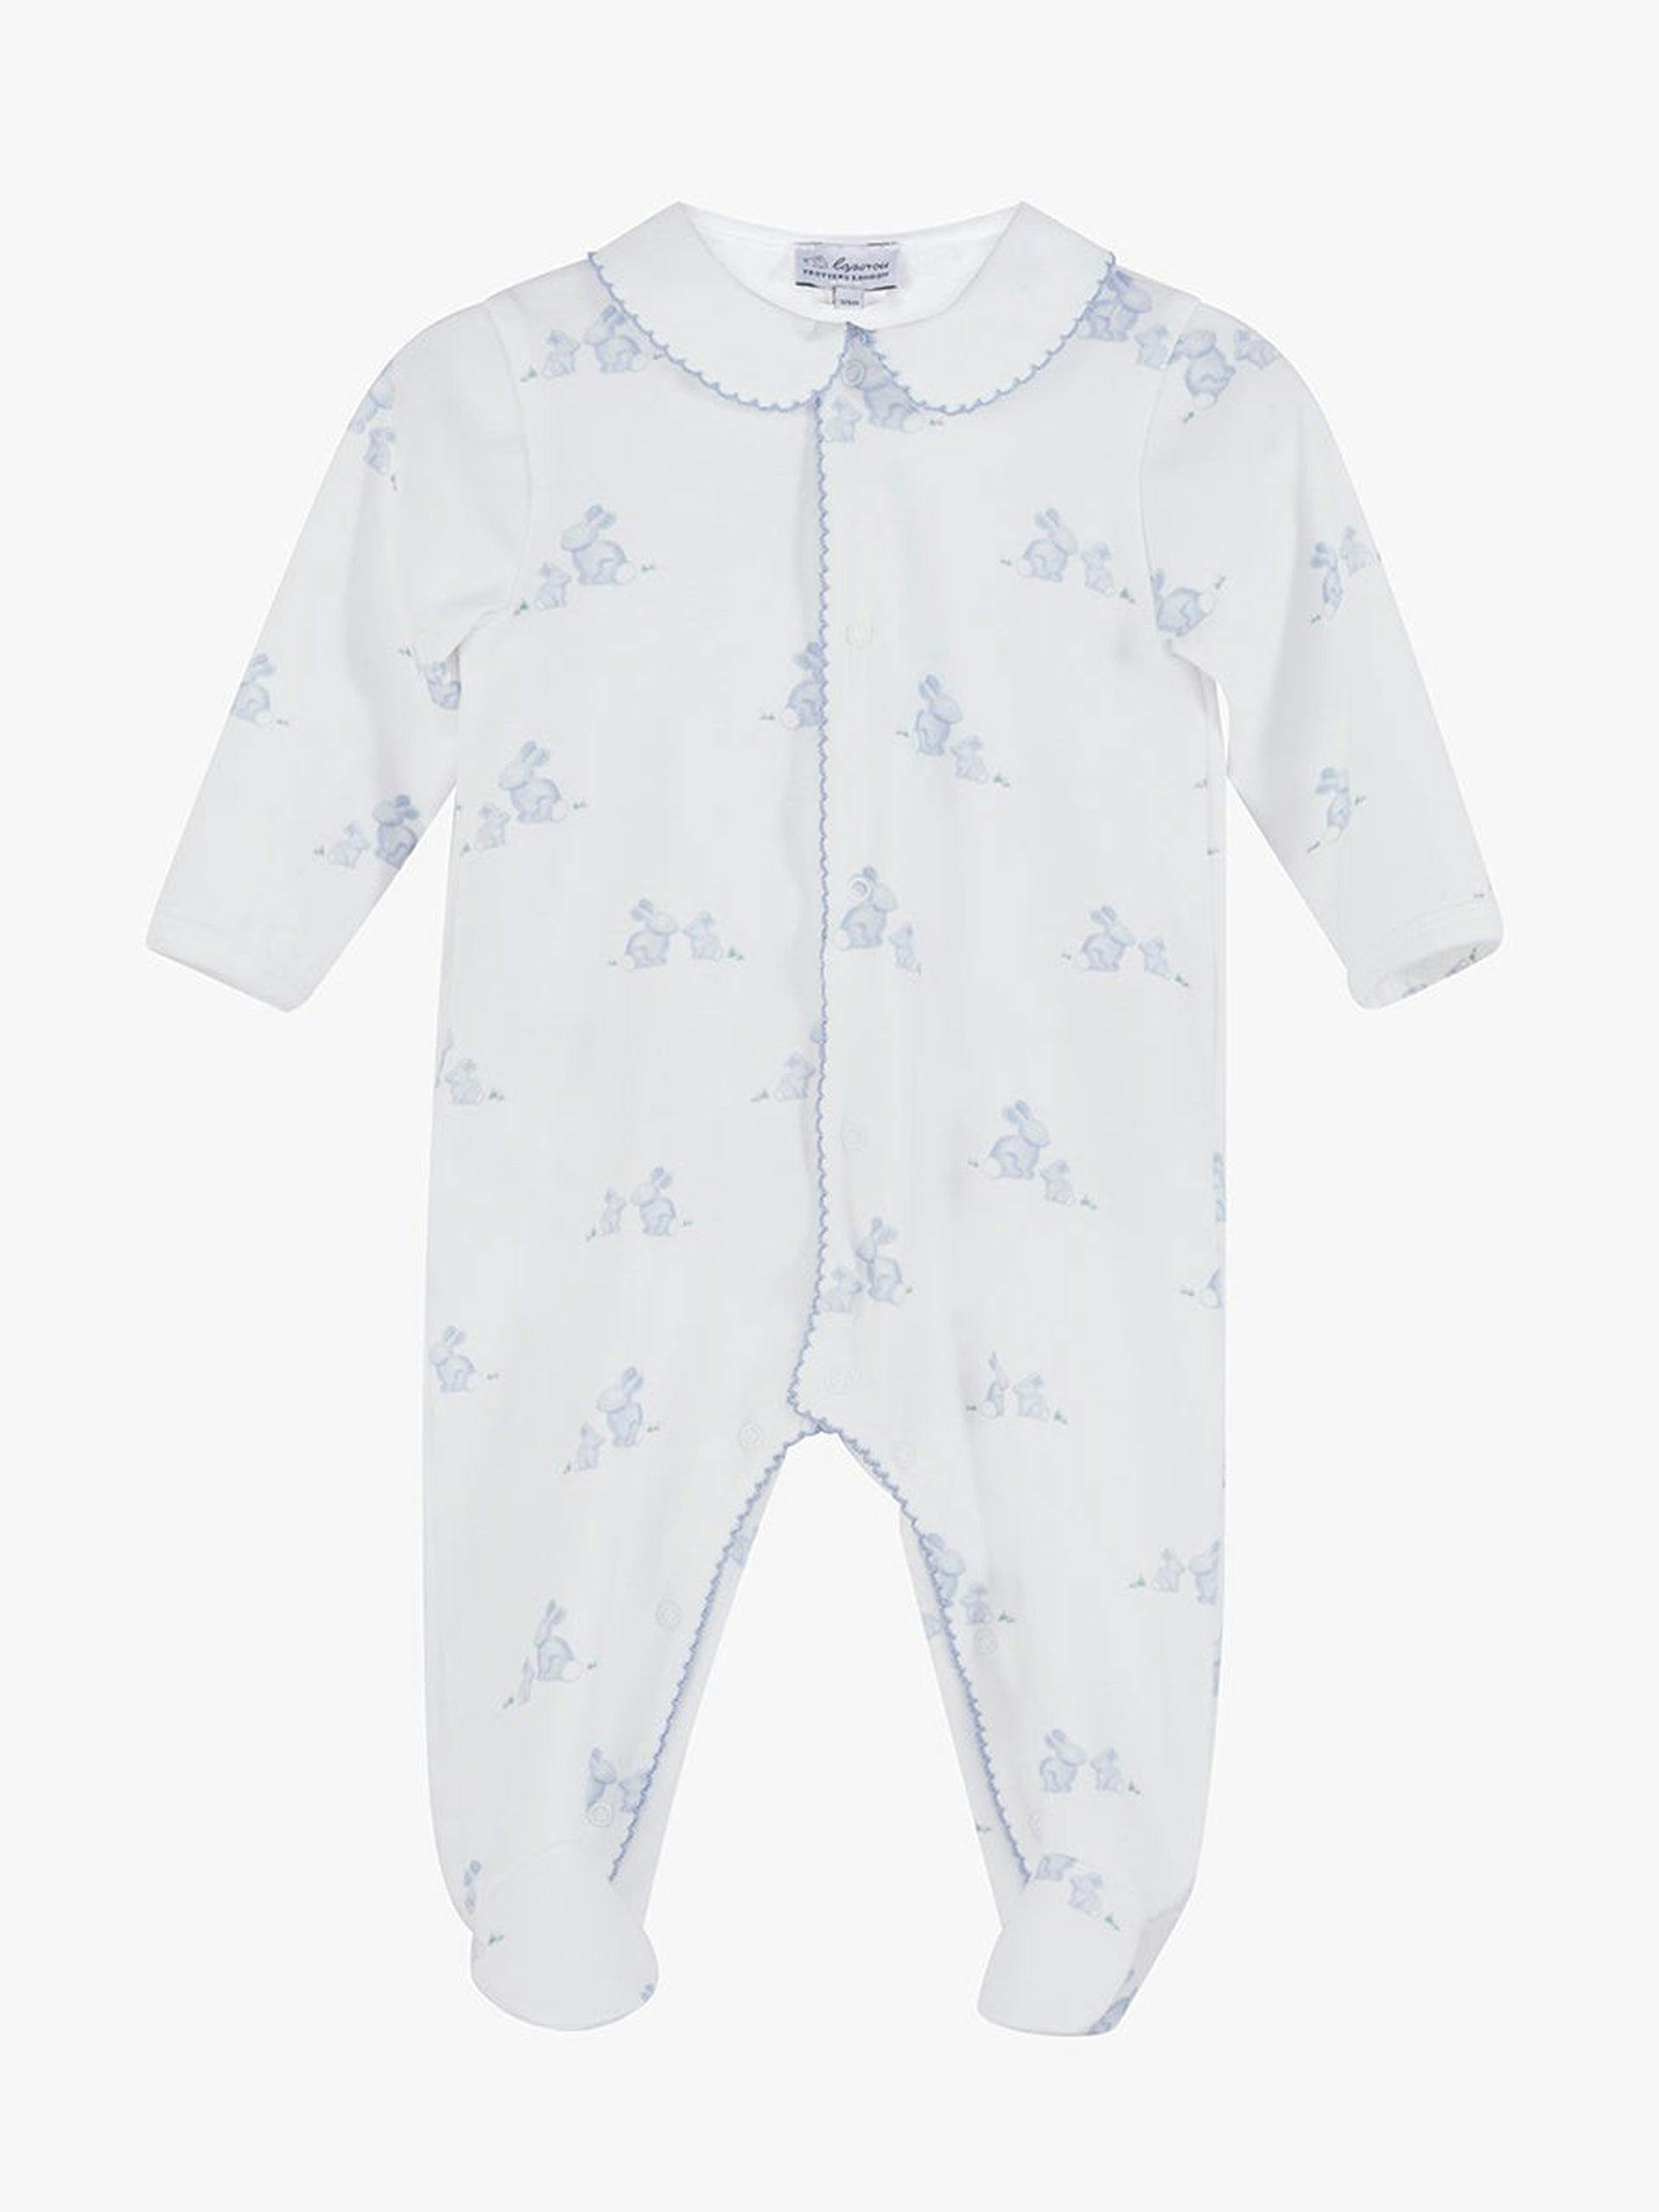 Blue bunny all-in-one for little ones